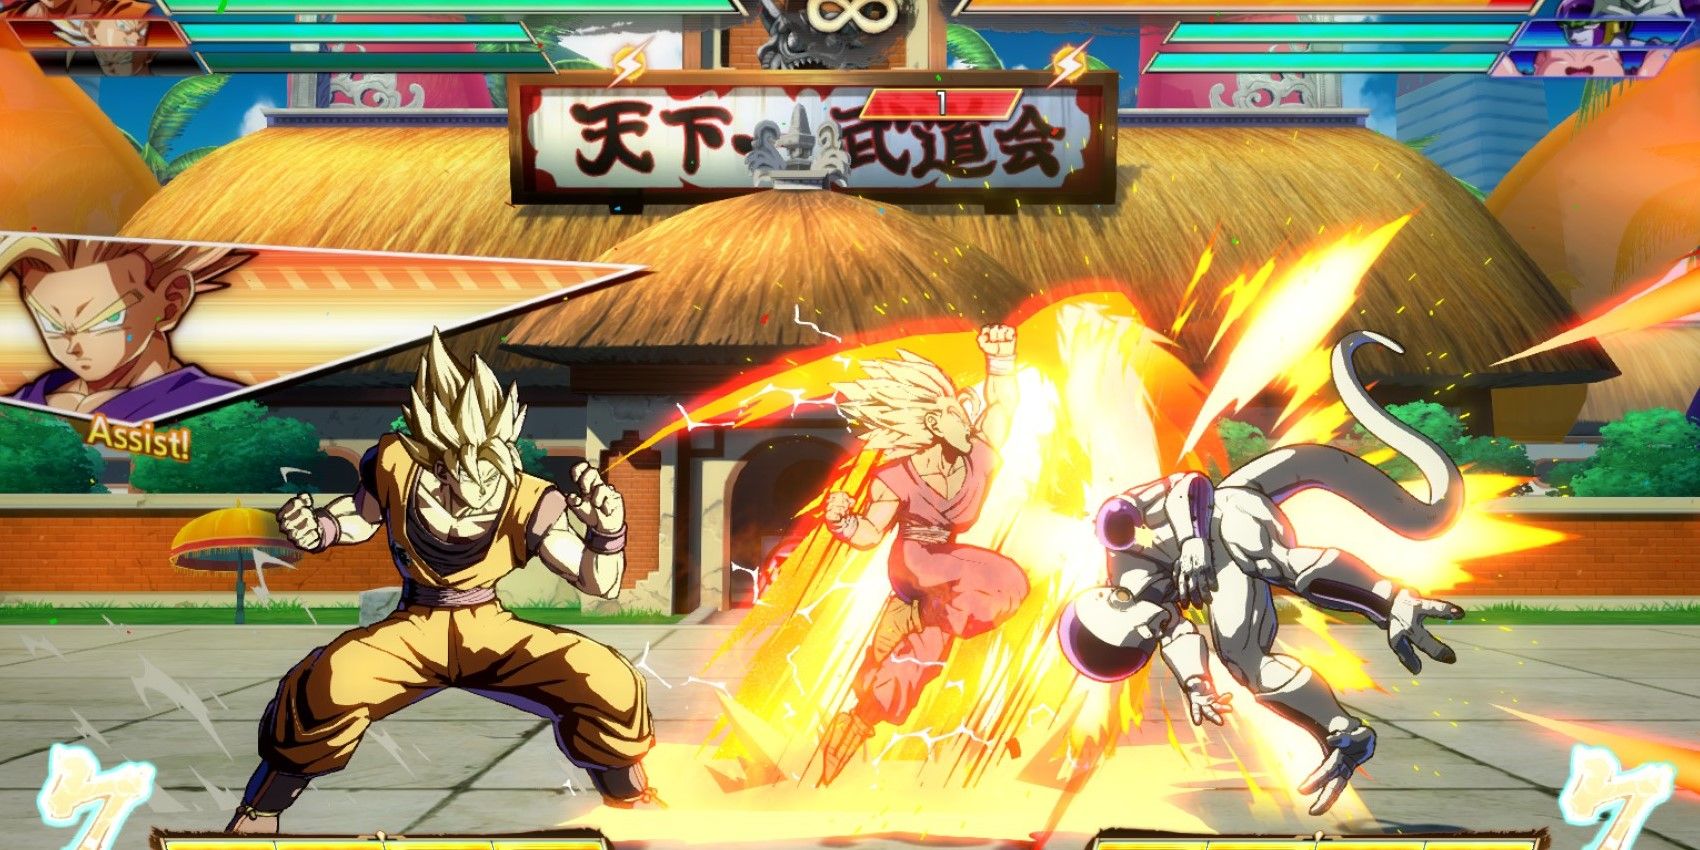 DBFZ Gohan assisting Goku with an attack against Frieza